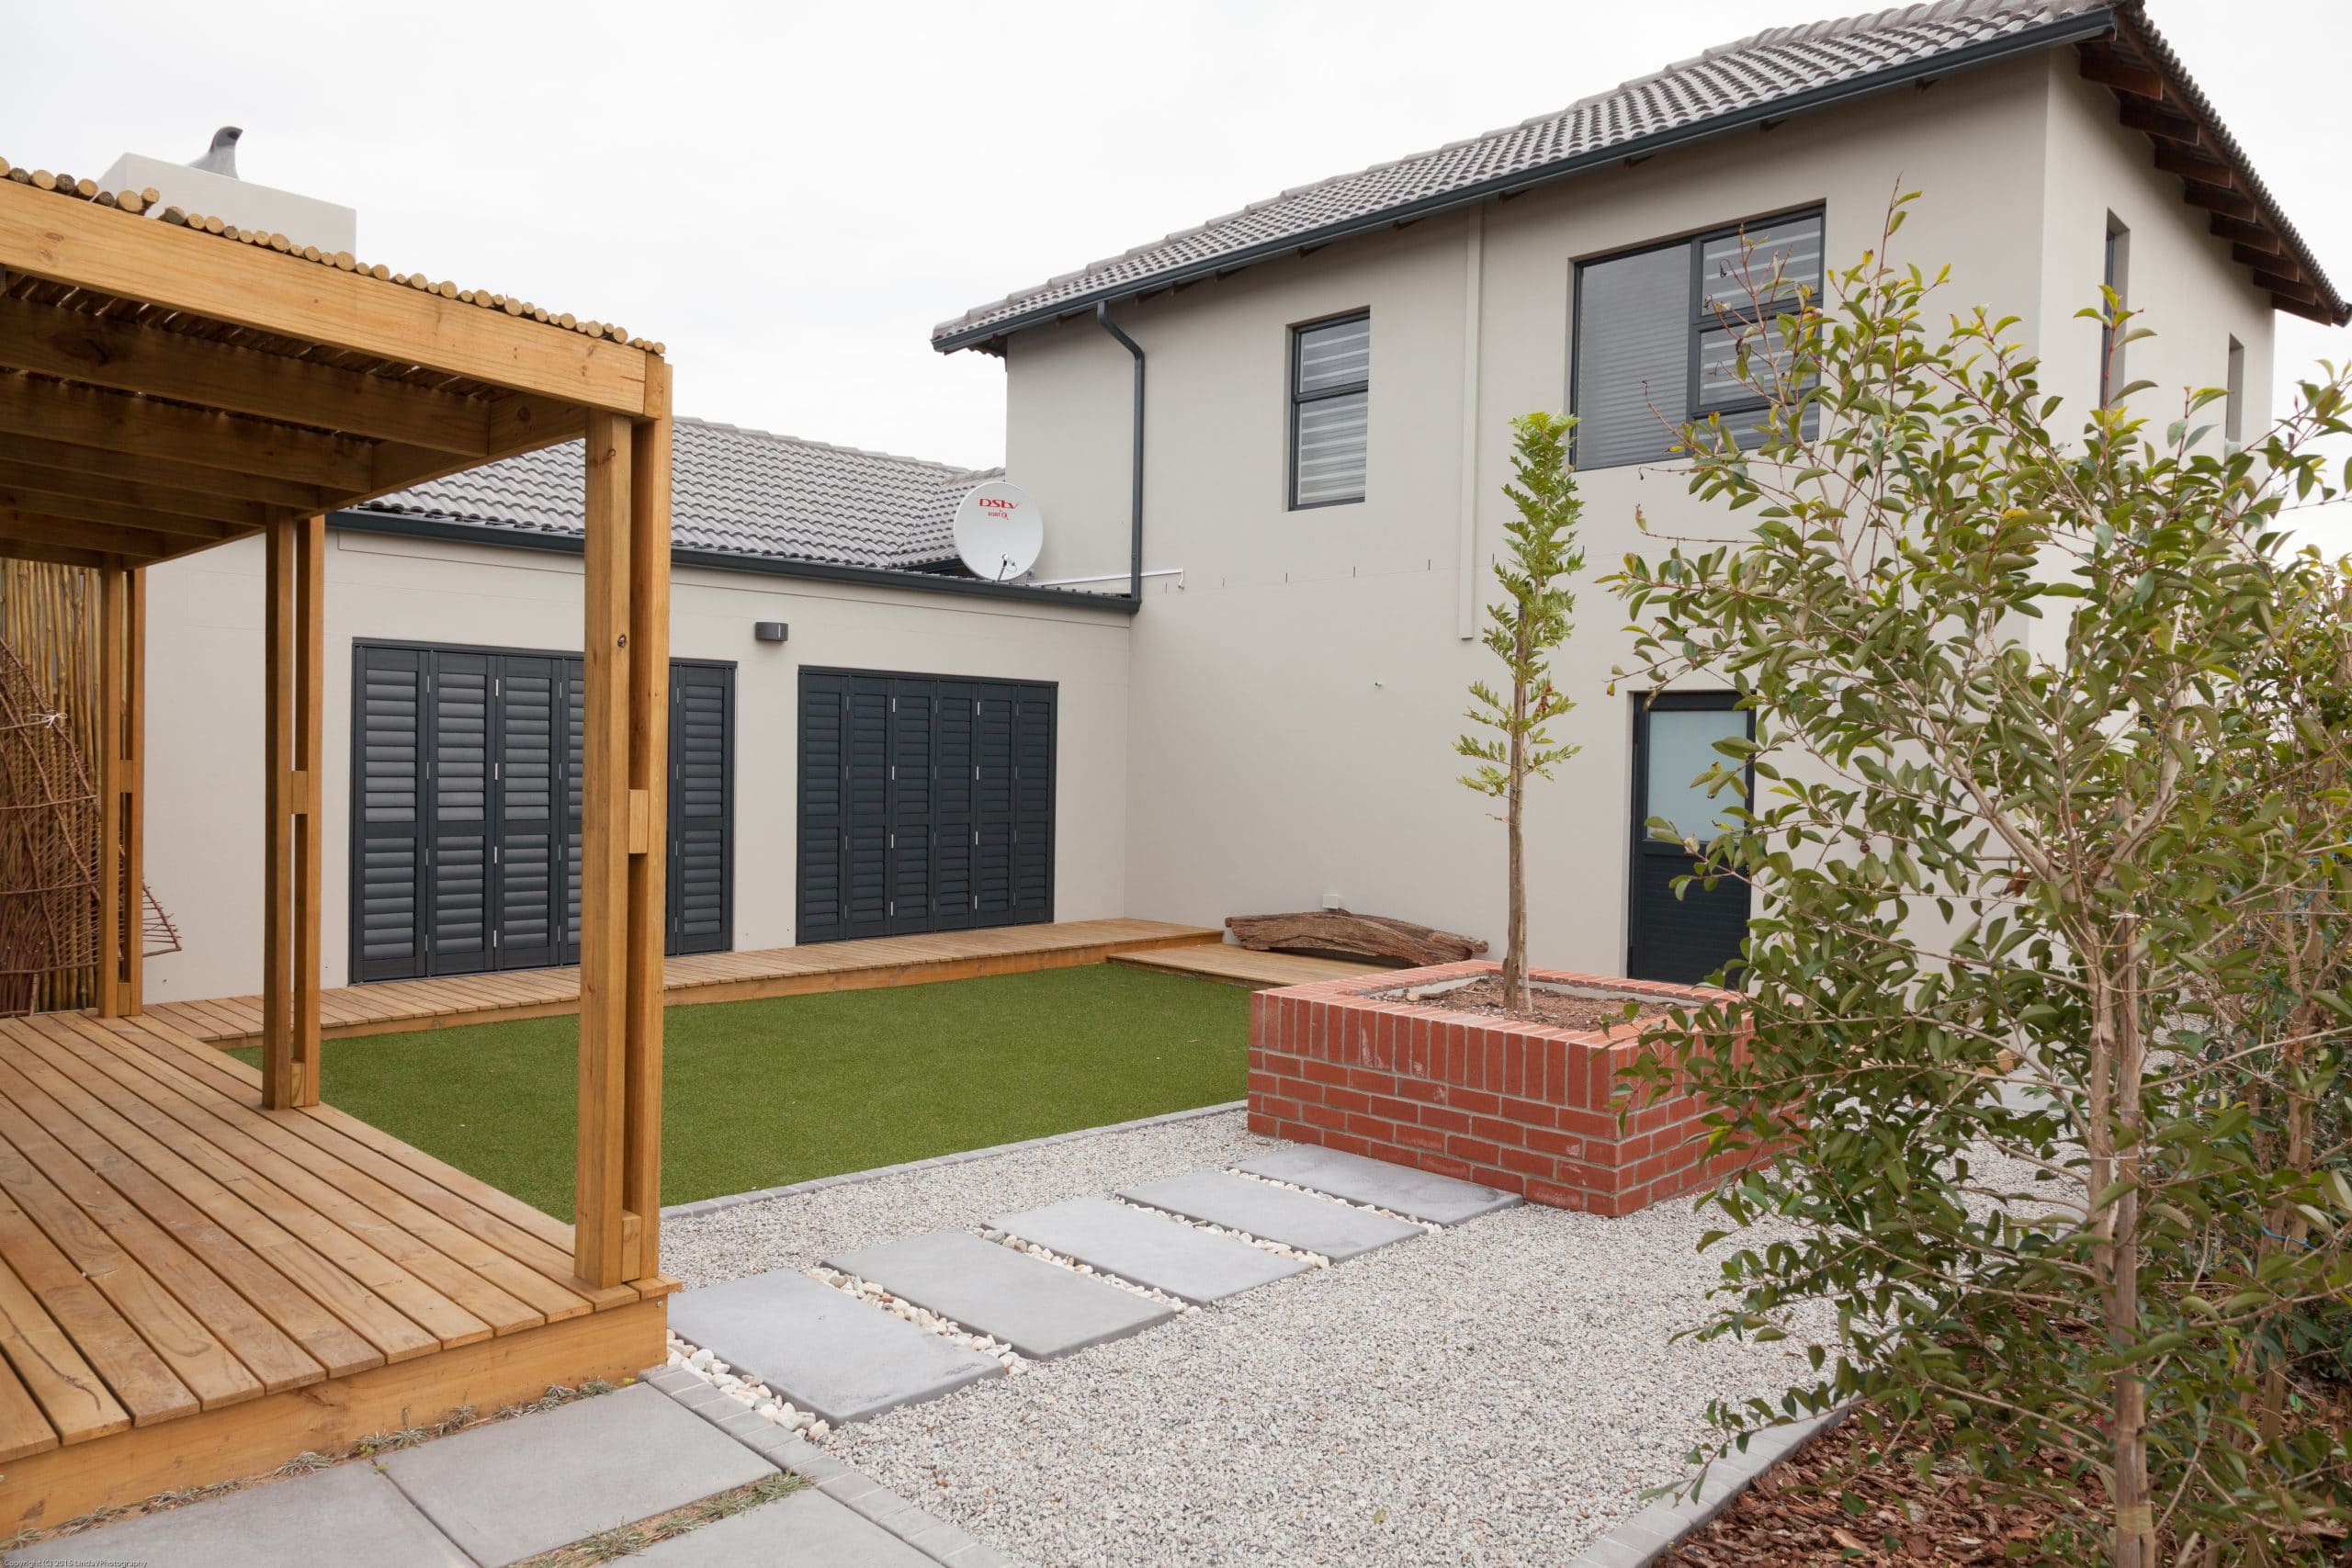 ultra modern exterior landscaping design with artificial turf lawn wooden timber decking